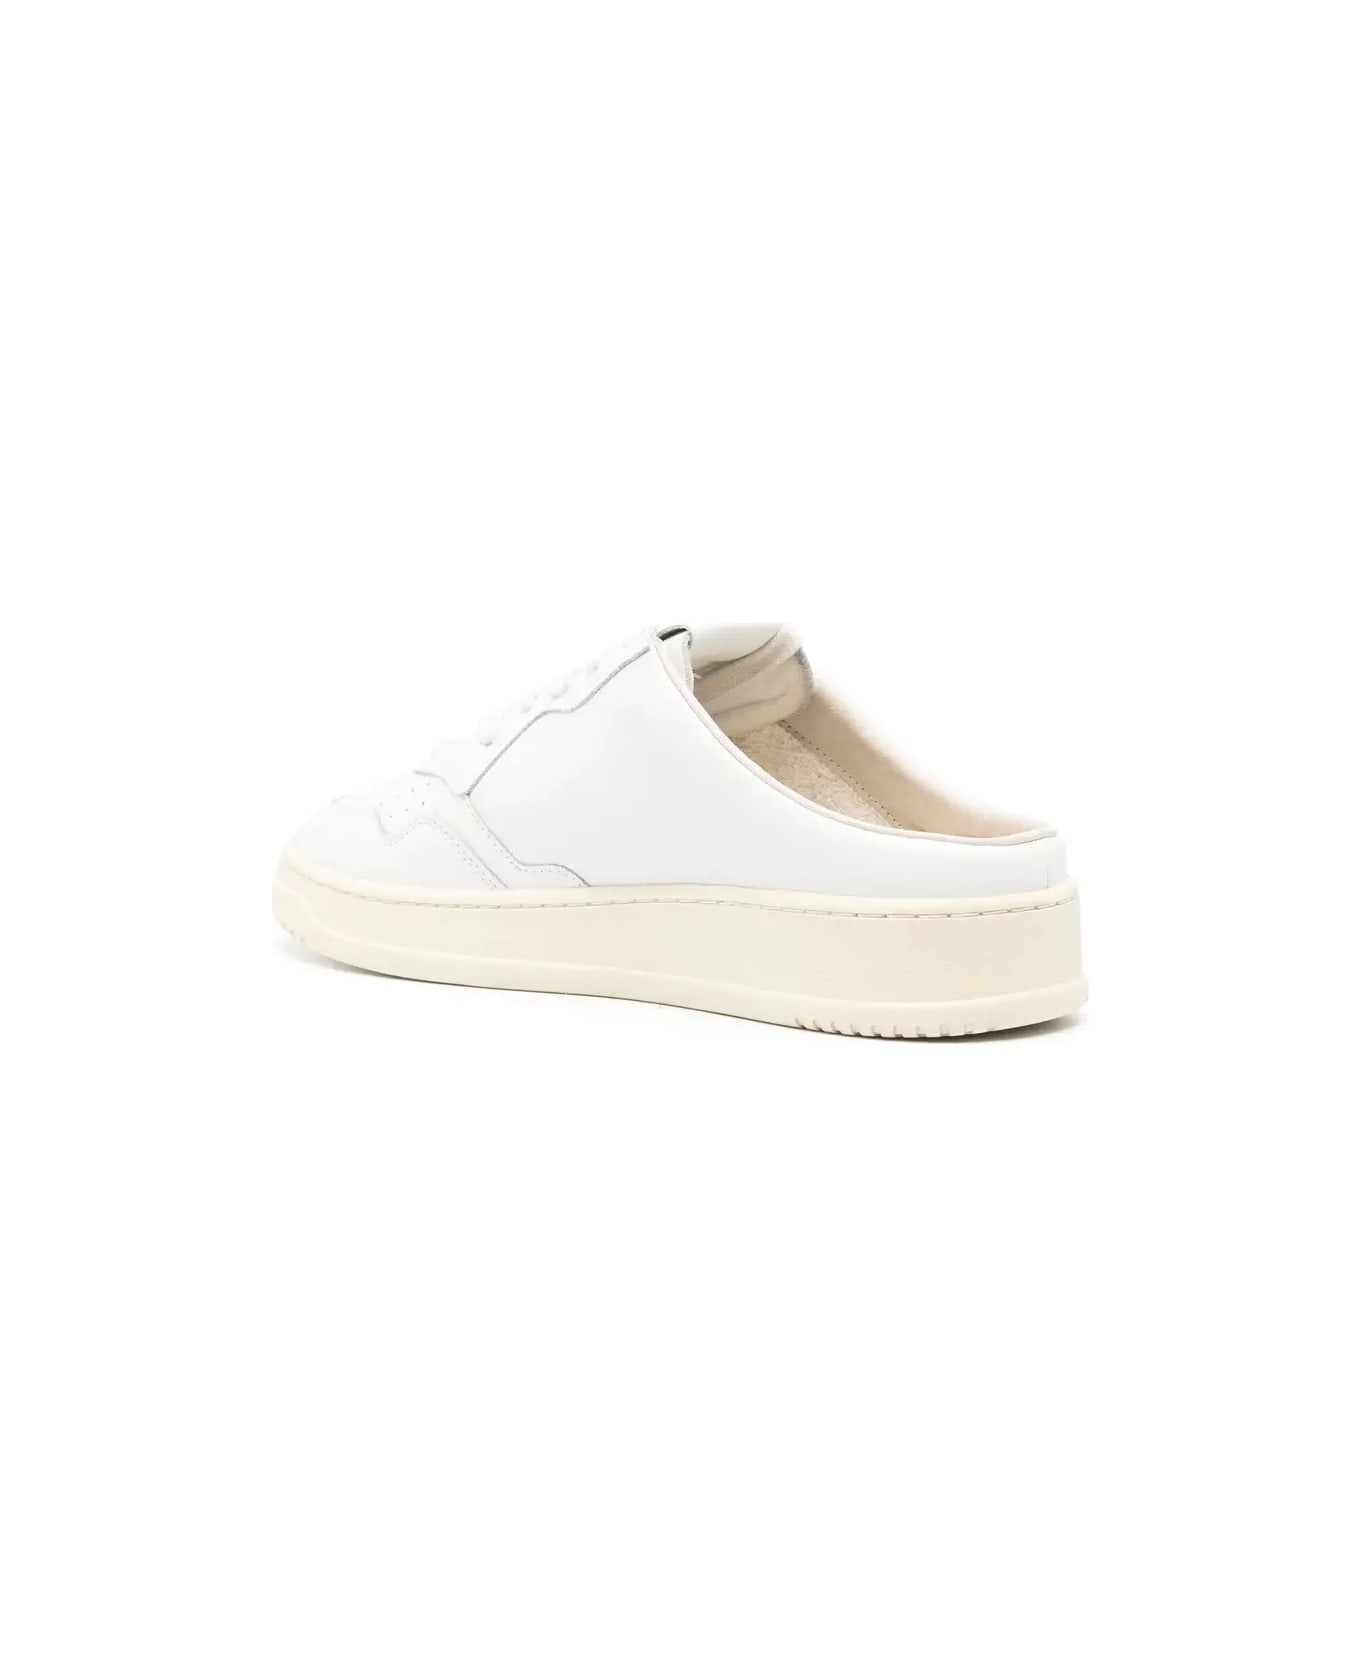 Autry White Medalist Mule Sneakers - White スニーカー